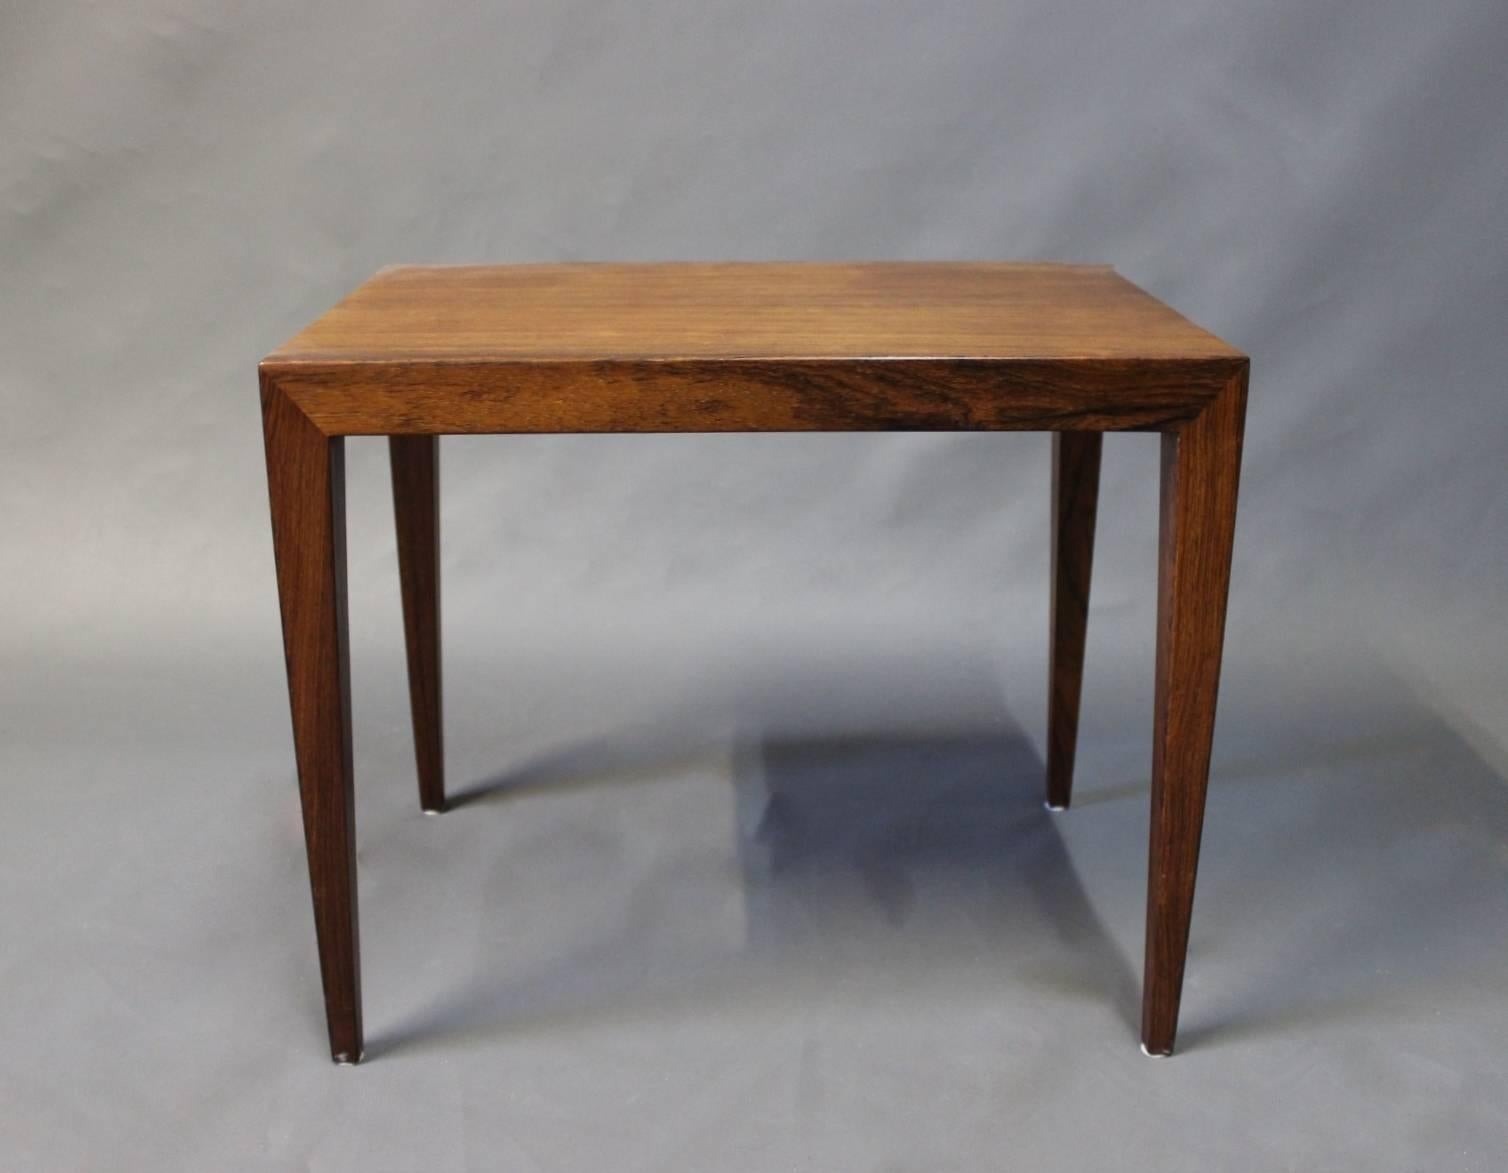 Small side table in rosewood designed by Severin Hansen for Haslev Furniture Factory in the 1960s.